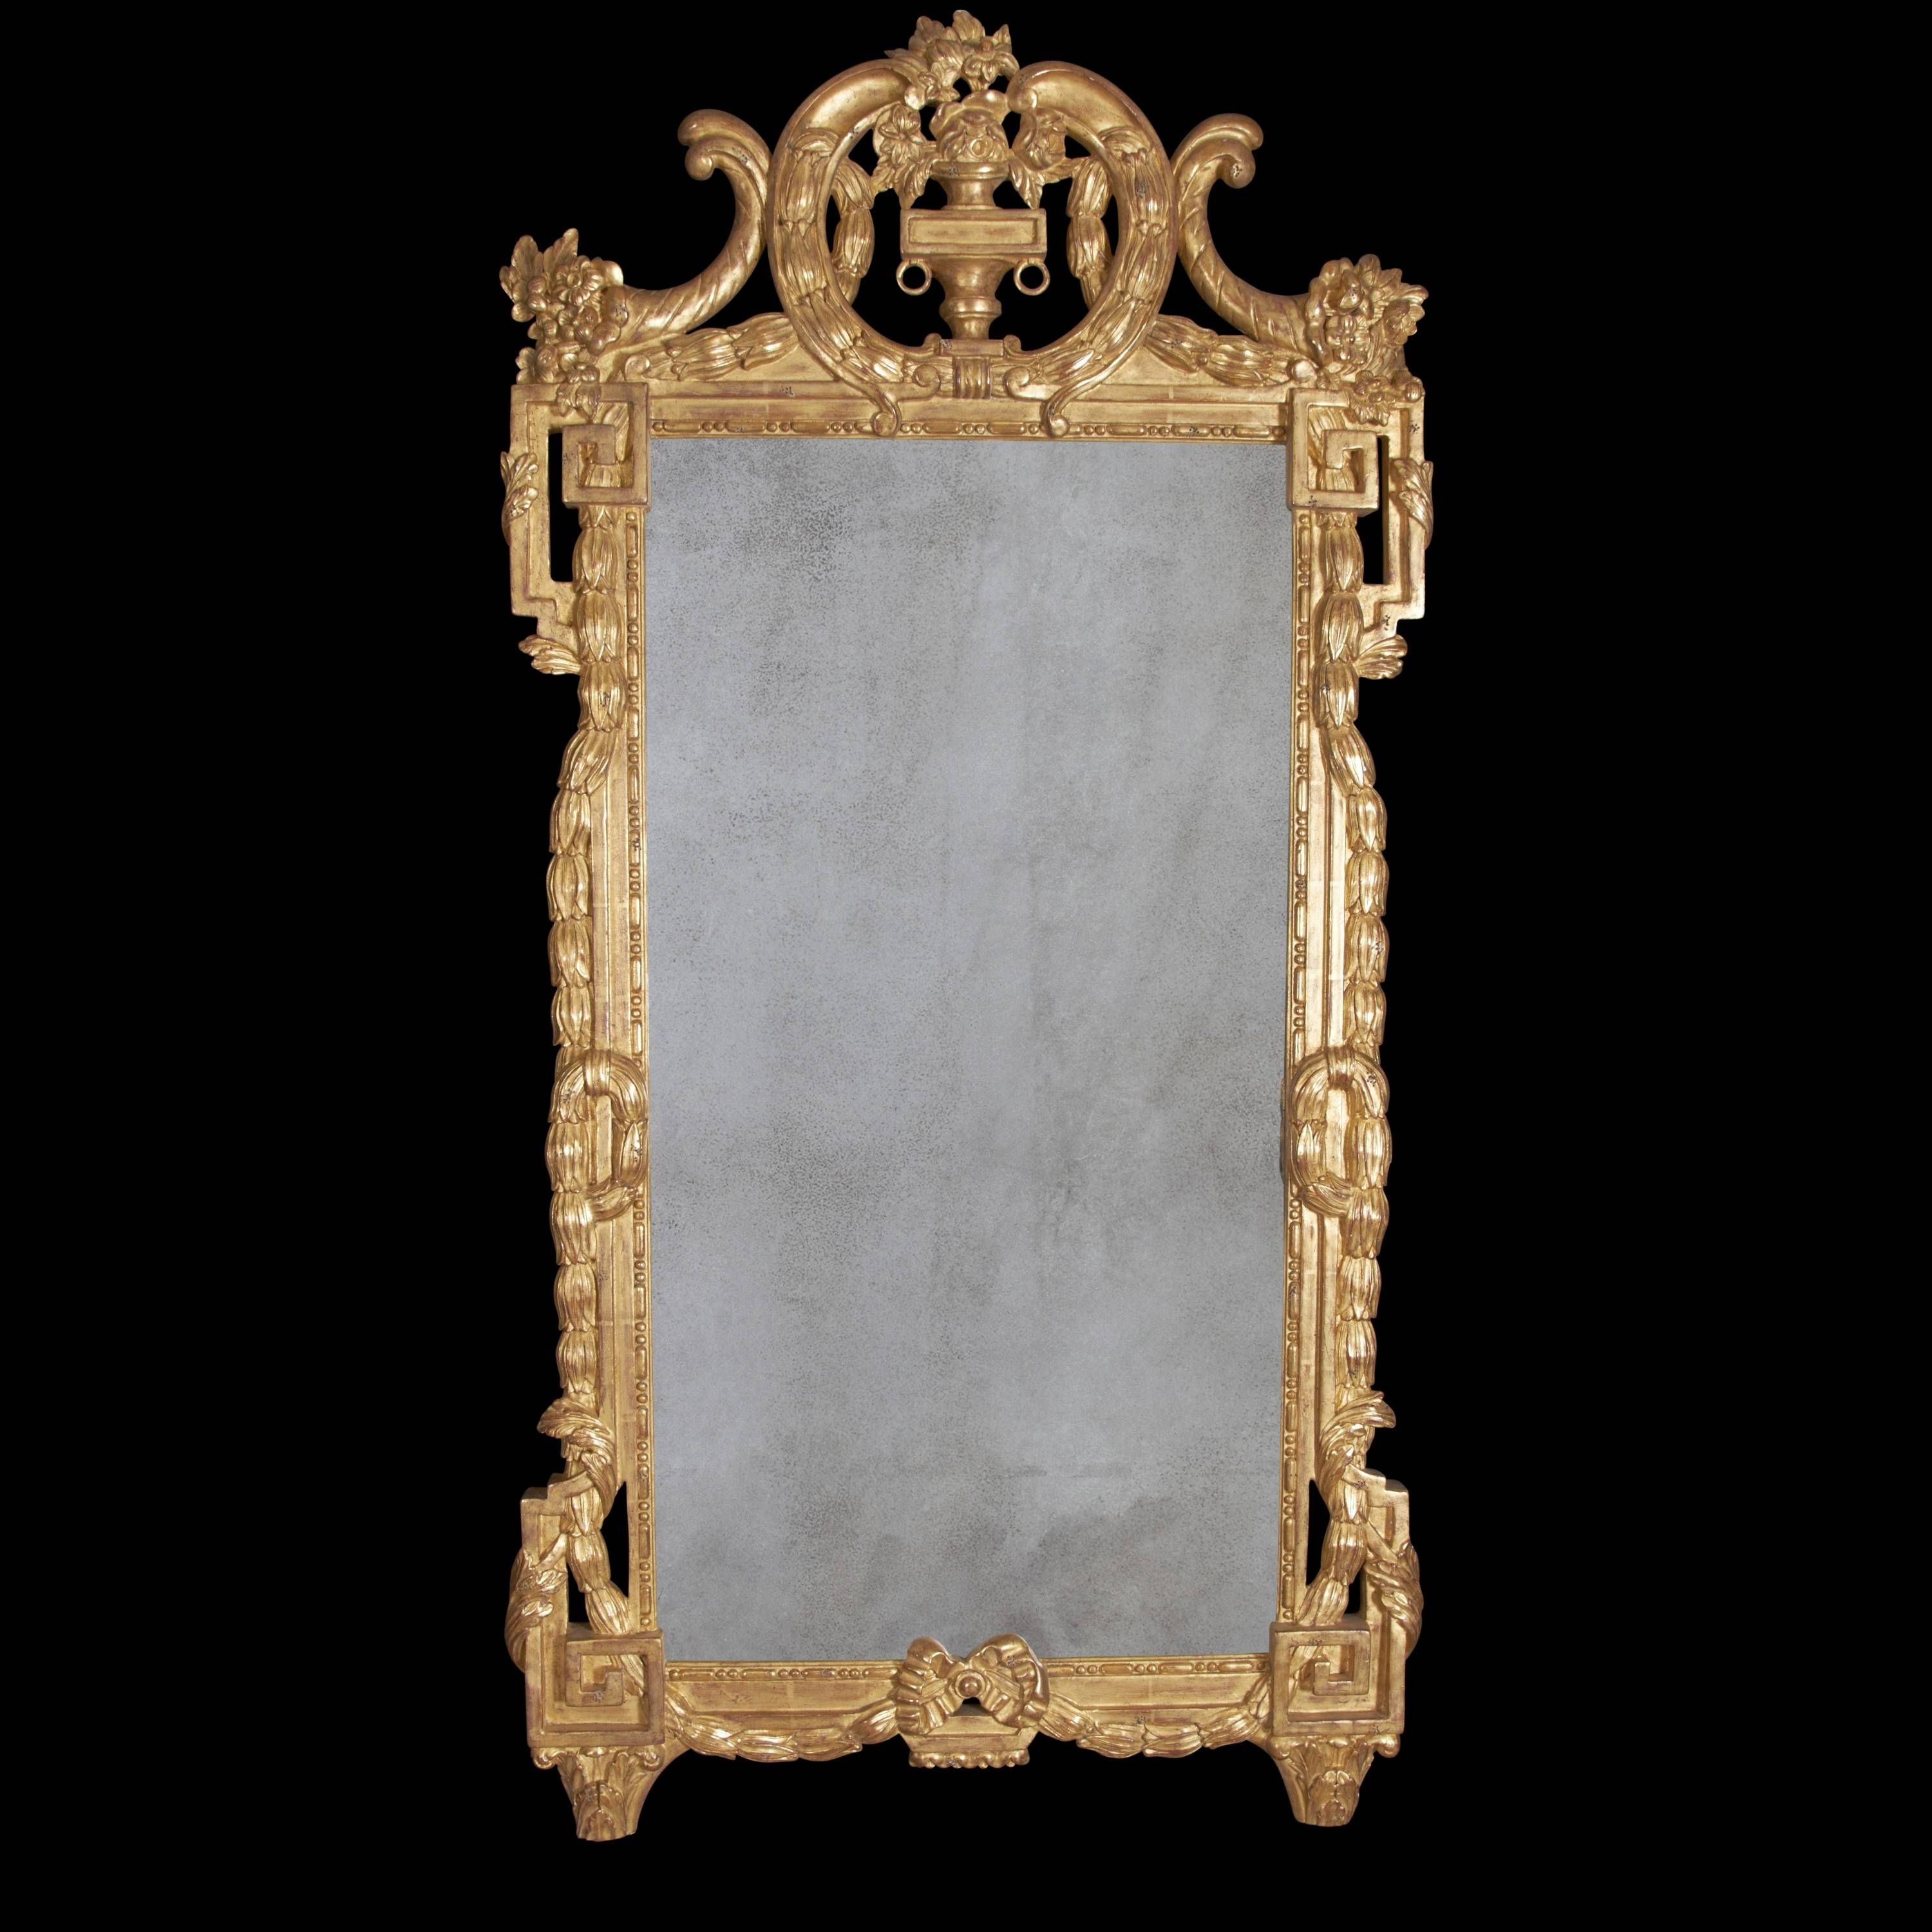 Home Decor: Fascinating Antique Mirror Images Design Inspirations Inside Old Fashioned Mirrors (View 5 of 25)